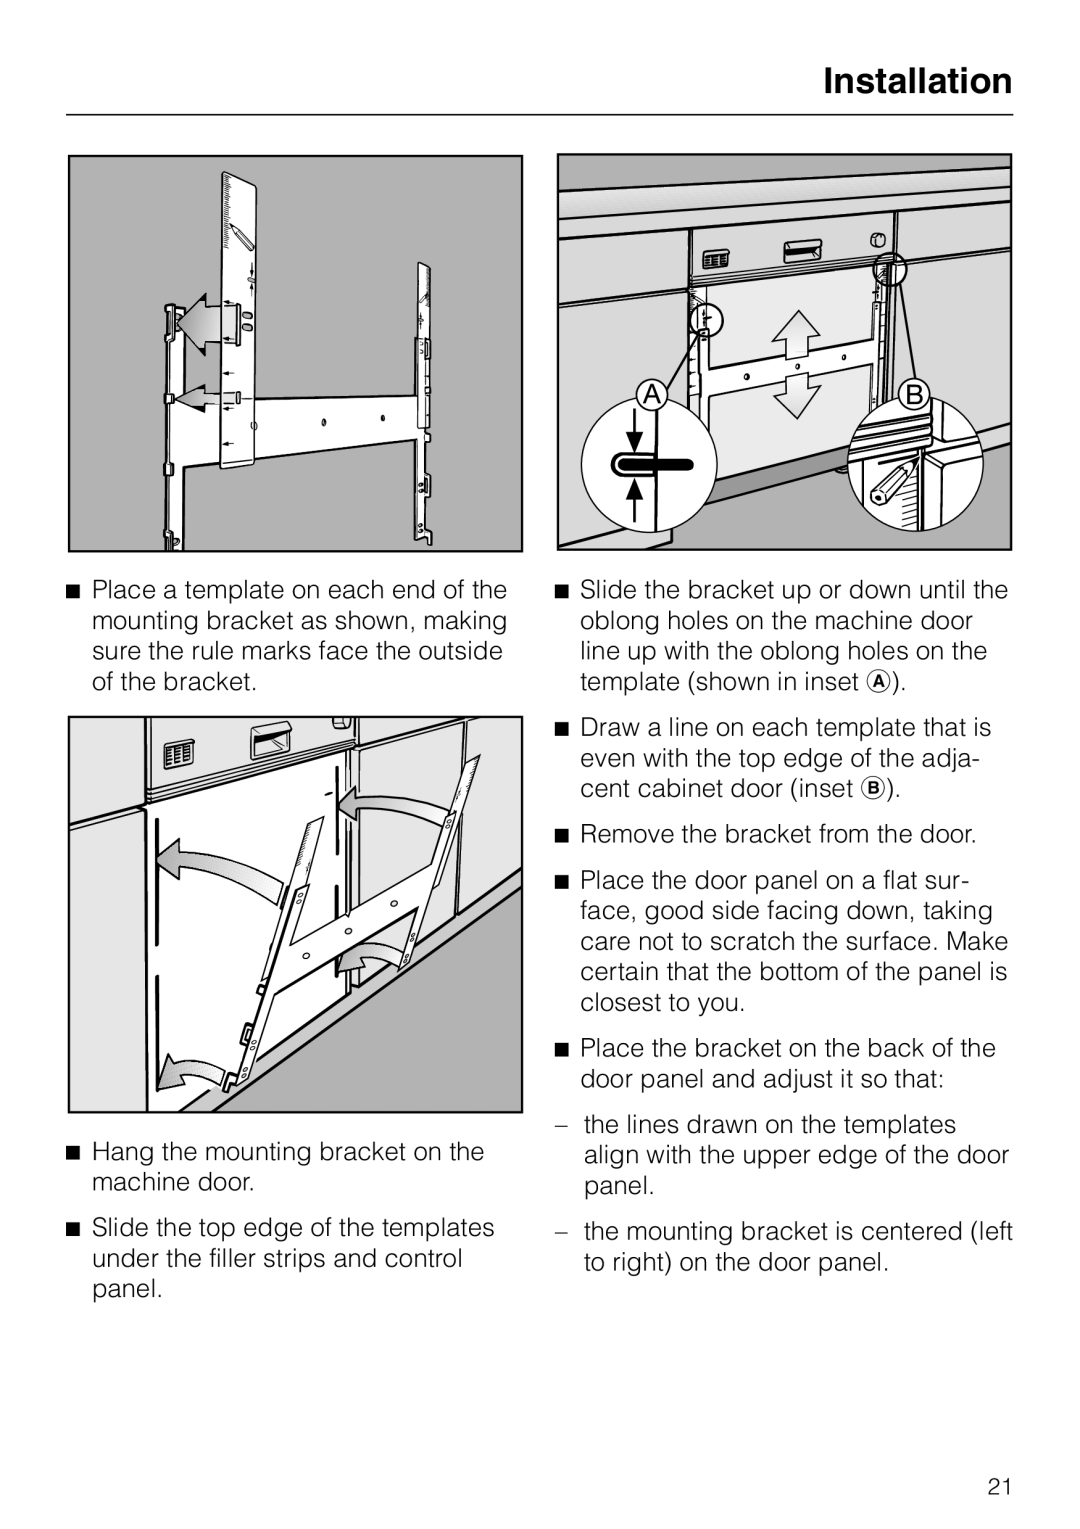 Miele HG02 installation instructions Installation, Hang the mounting bracket on the machine door 